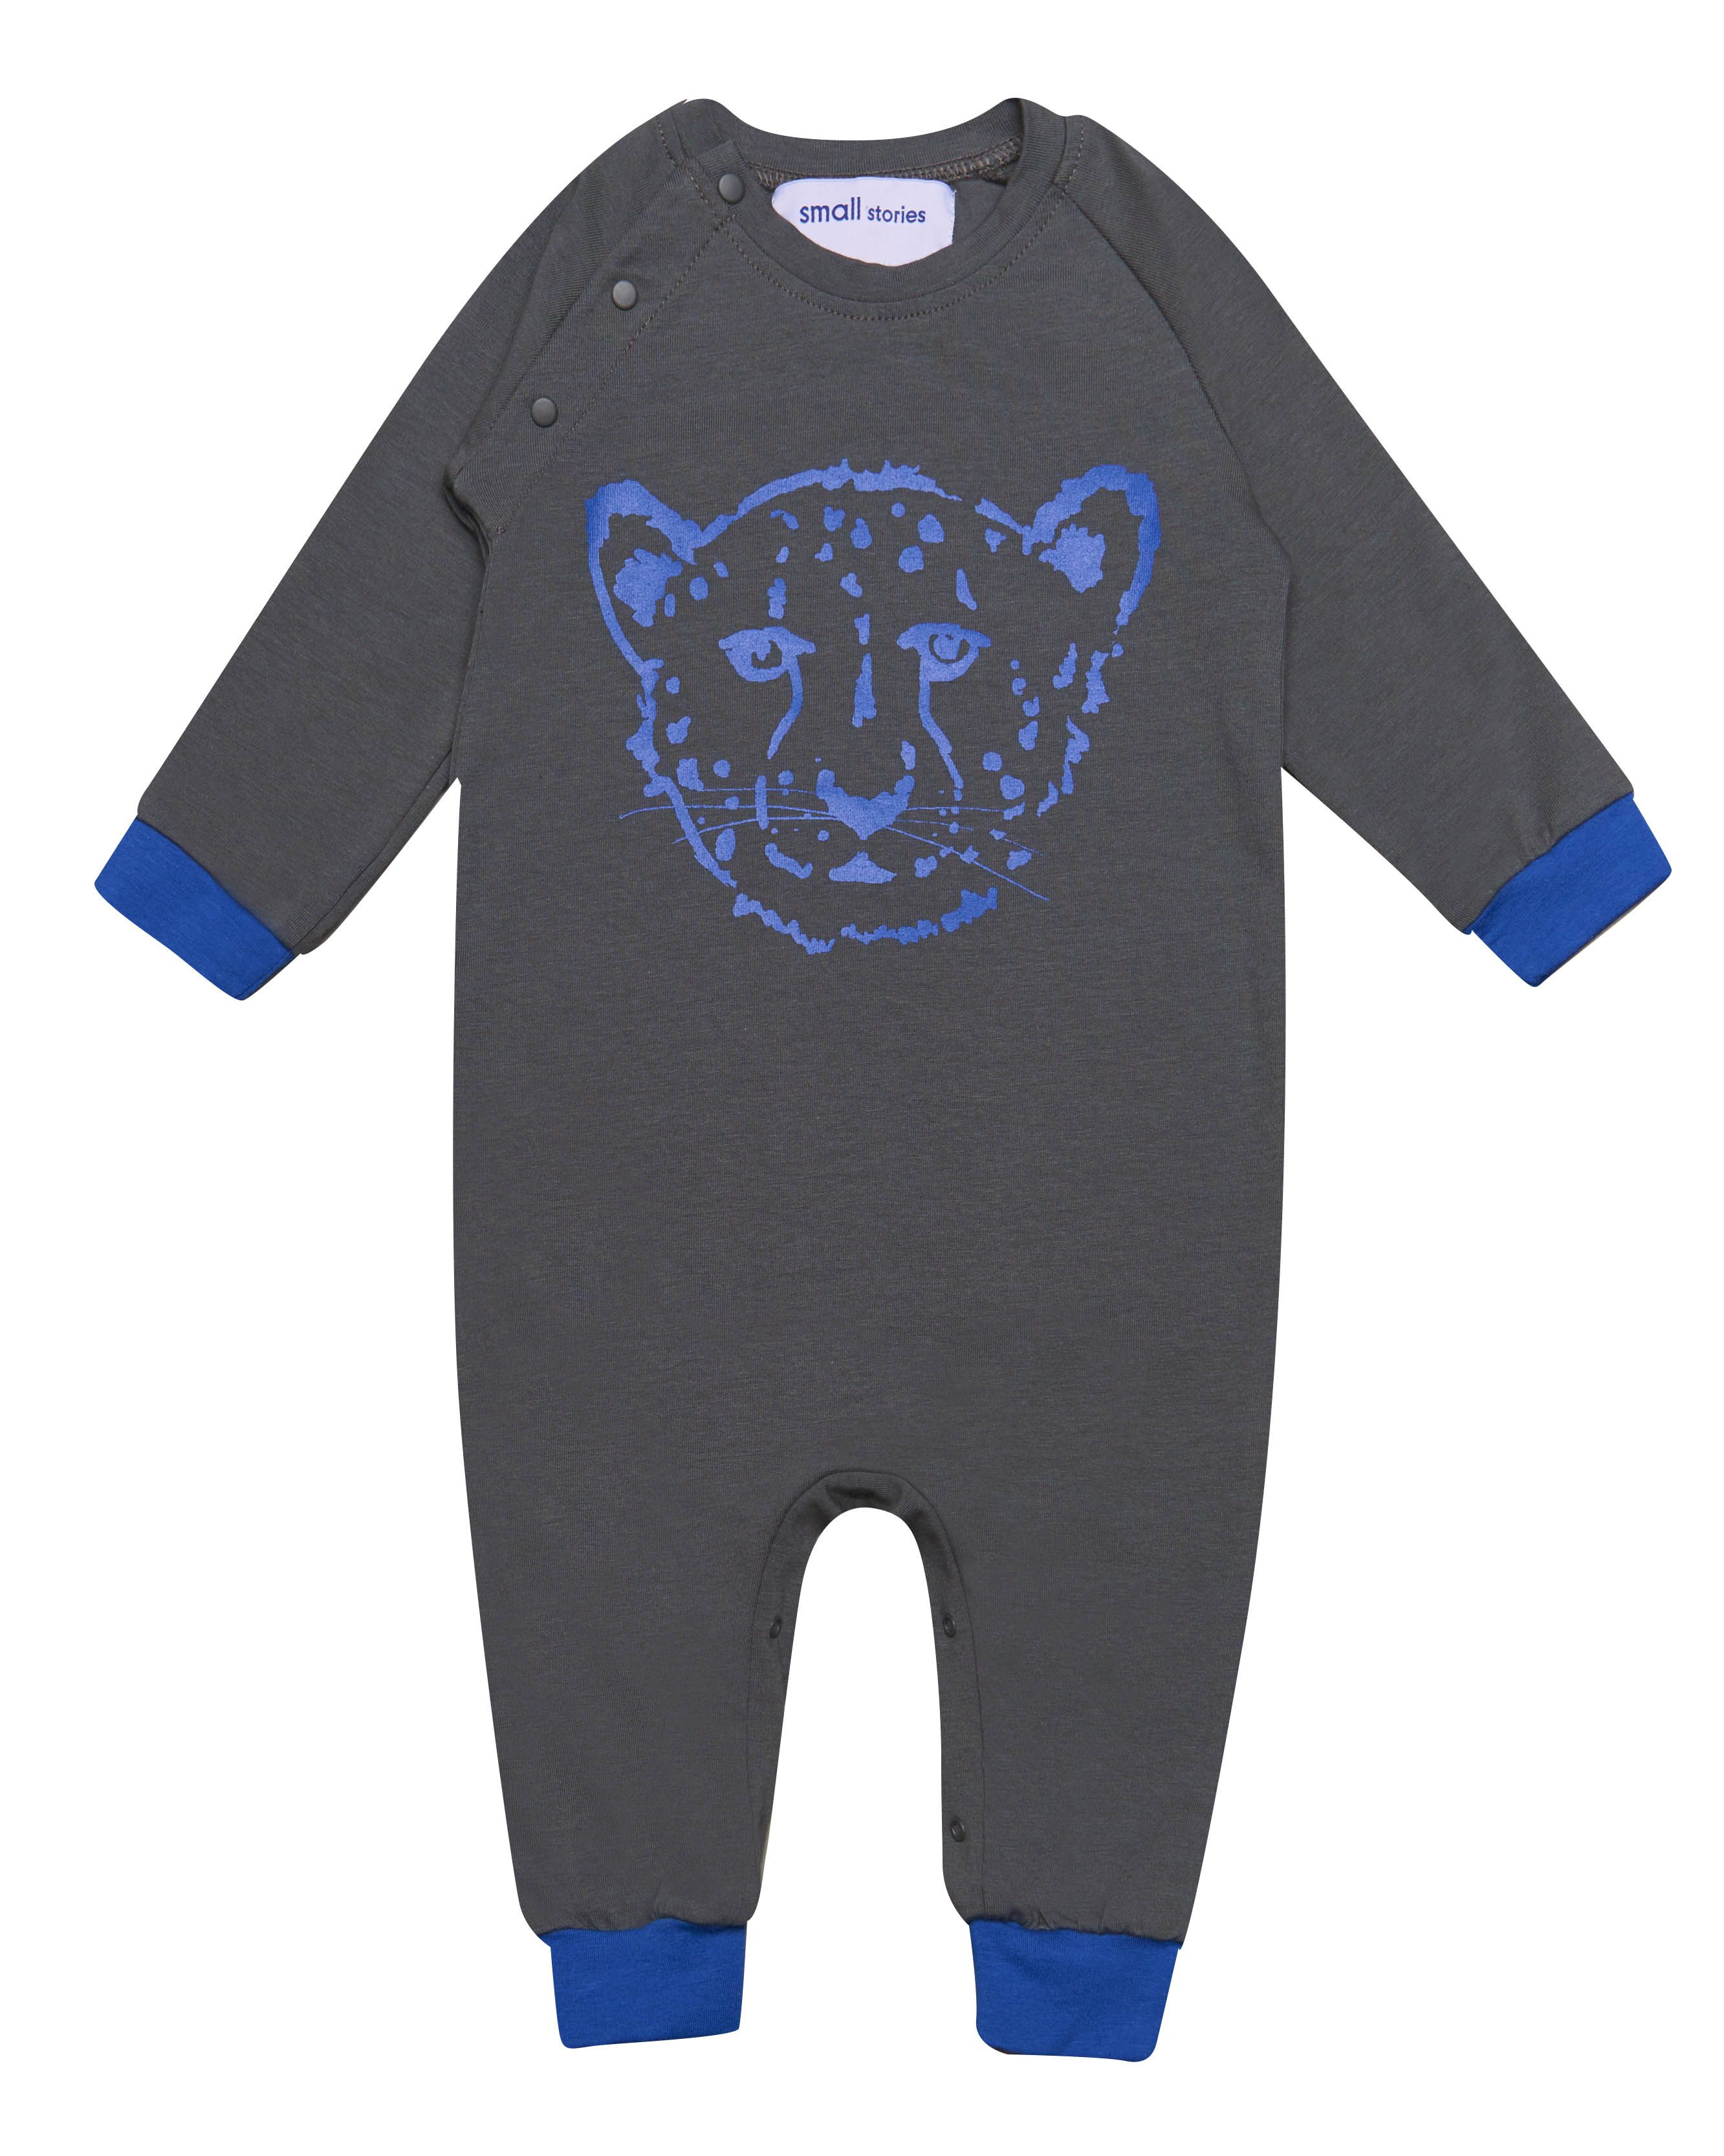 Super soft stretchy grey cotton baby romper with our bespoke painted cheetah print in blue. Made from plush cotton to ensure the softest material is against your little one’s skin. Press stud opening at neck and crotch for ease of dressing. 